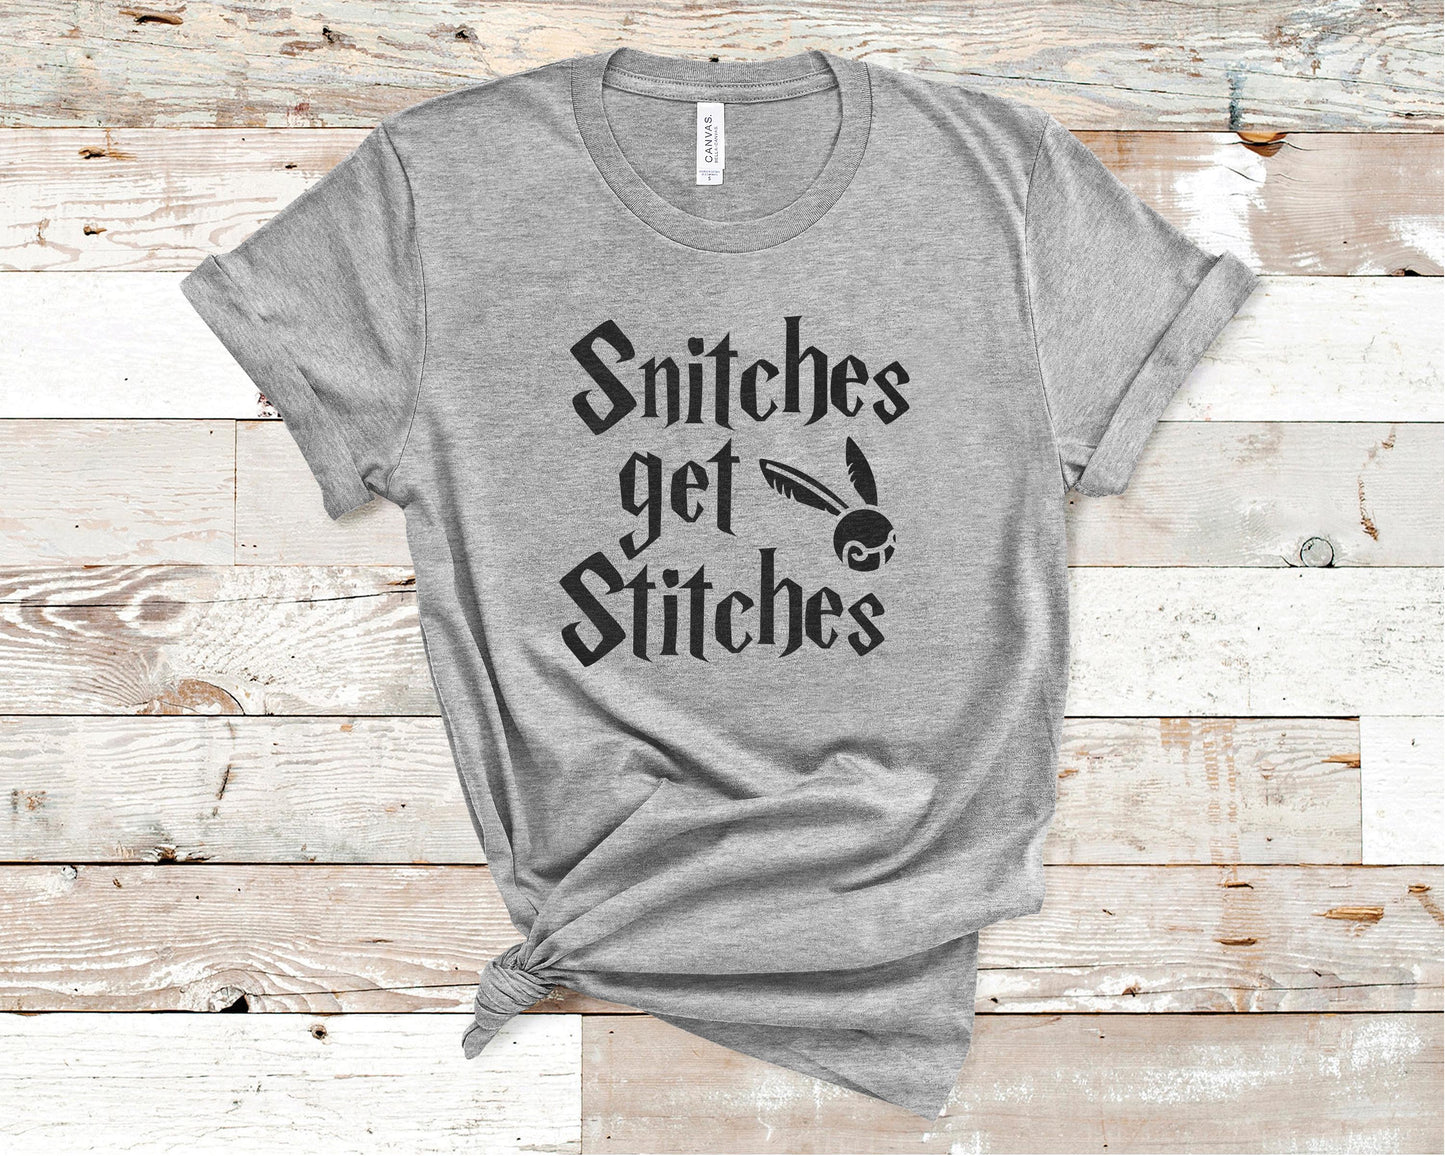 Snitches Get Stiches - Harry Potter